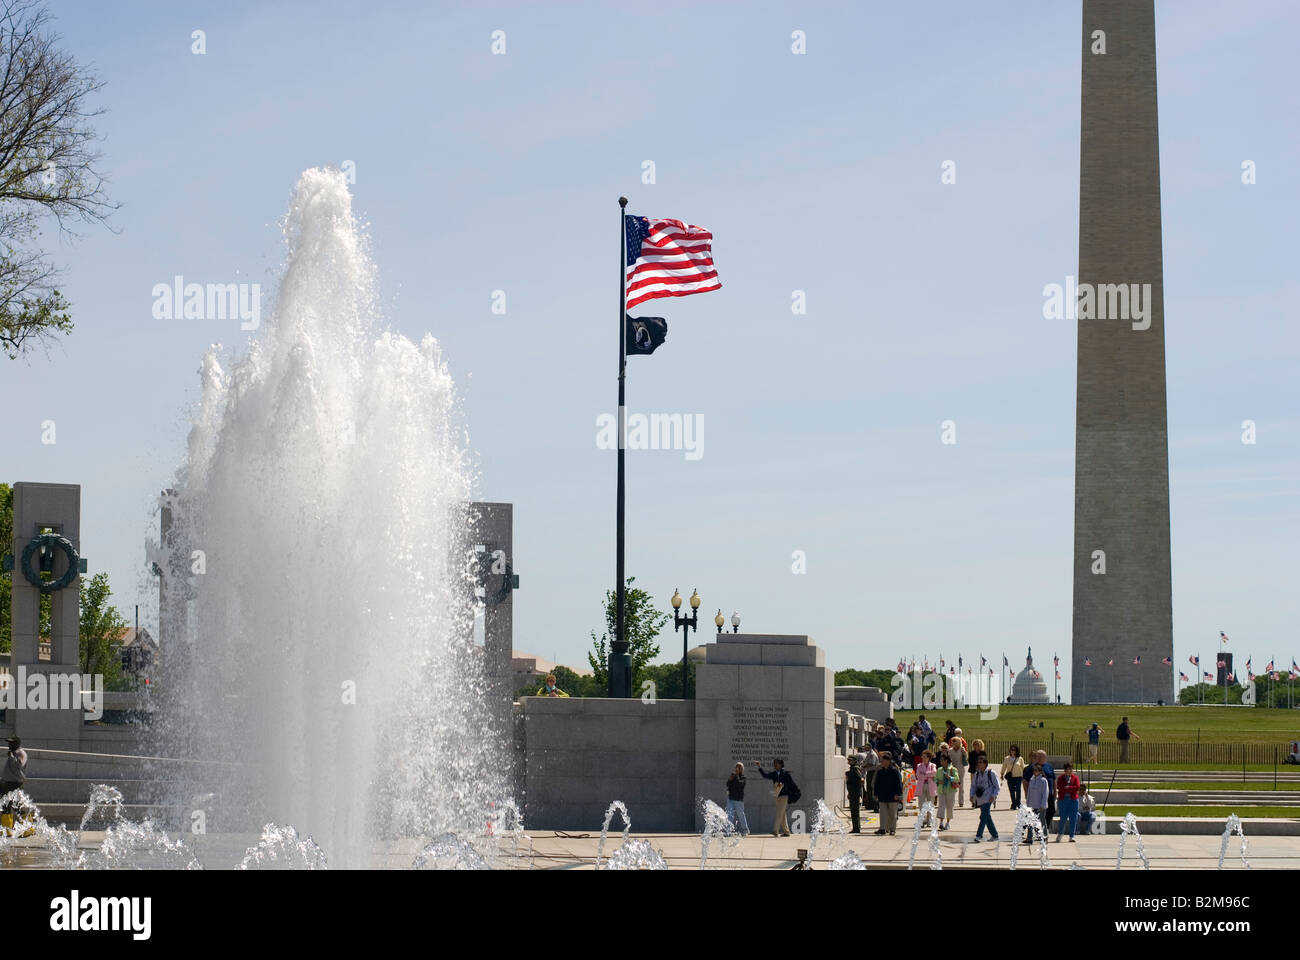 Tourists in Washington DC viewing memorials on the mall Stock Photo